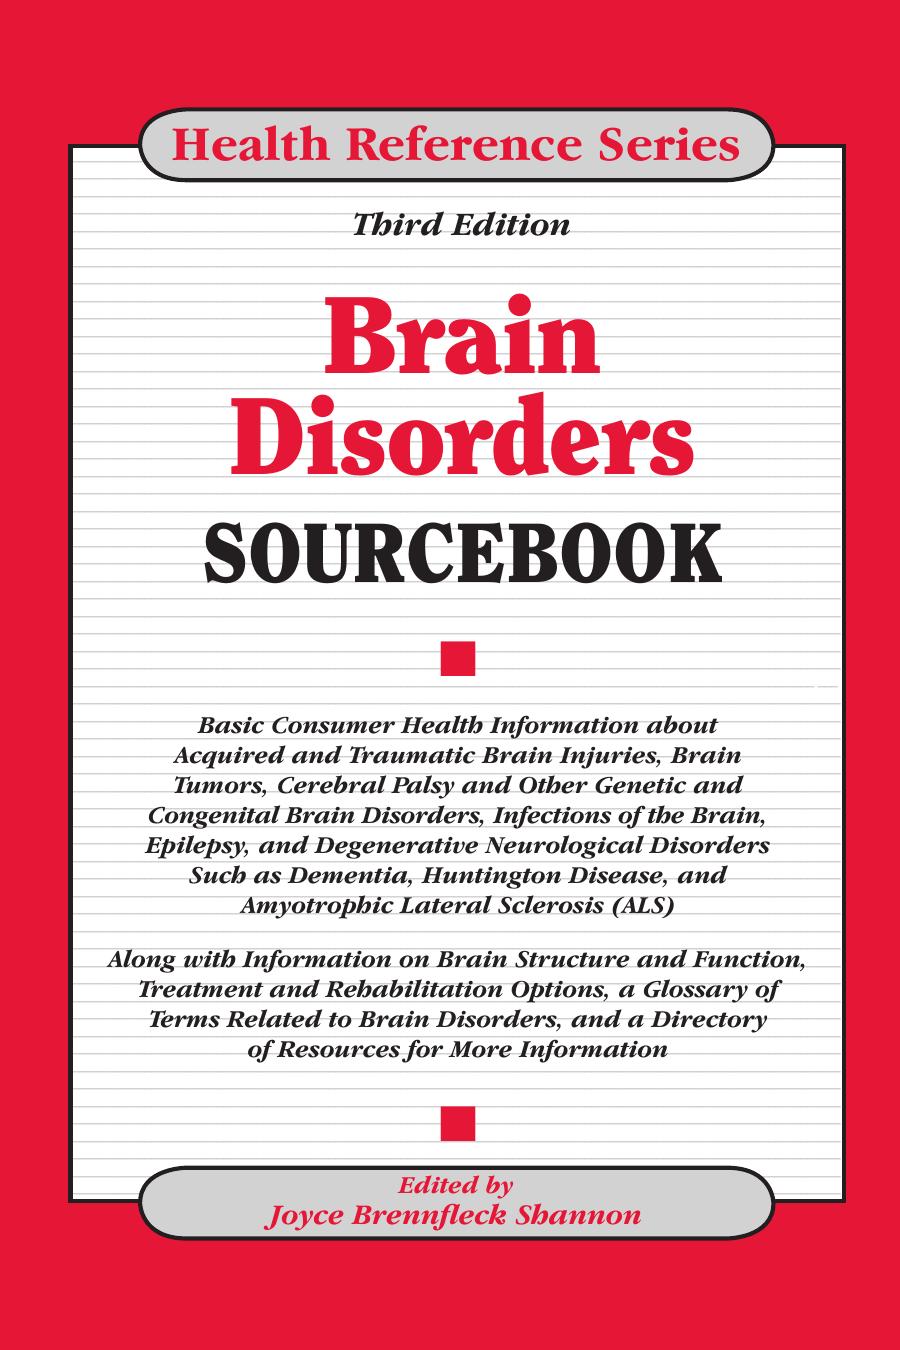 Brain Disorders Sourcebook (Health Reference Series) by Unknown